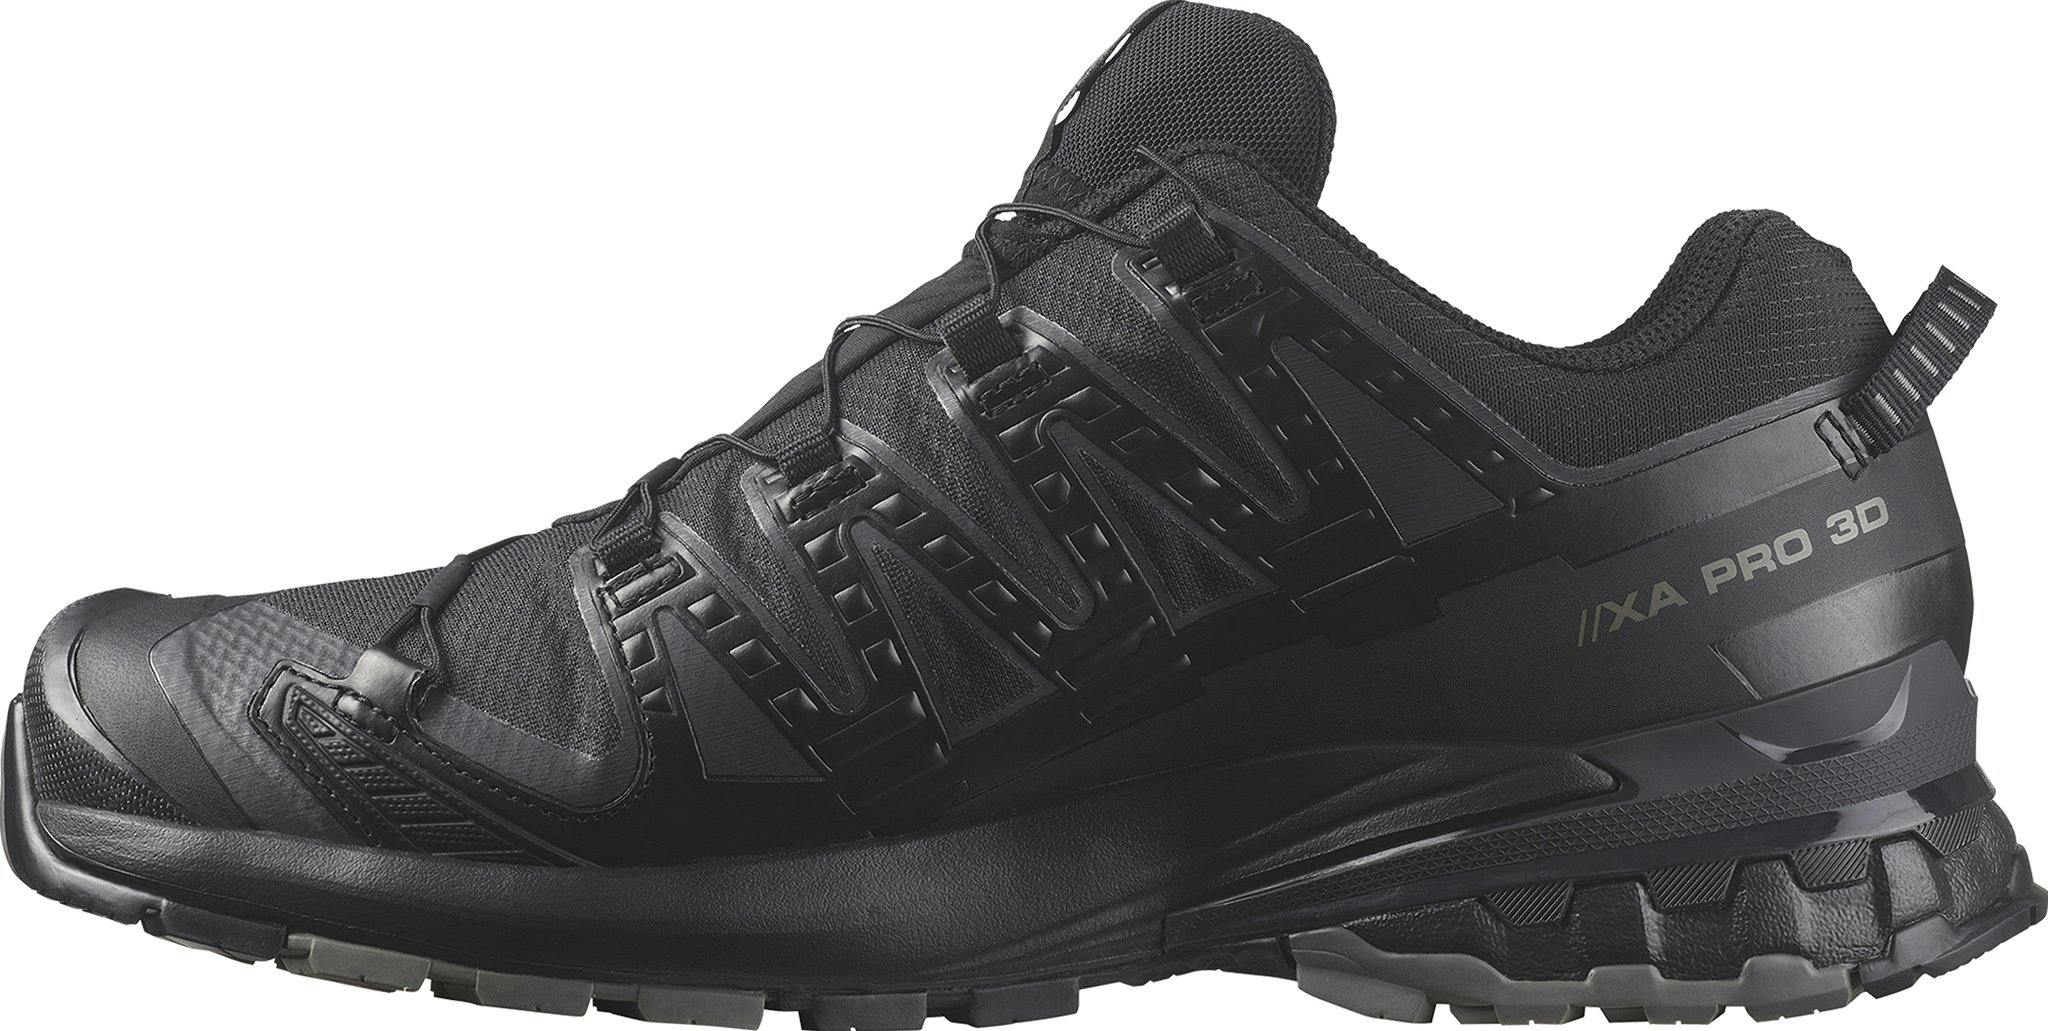 Product gallery image number 9 for product XA Pro 3D V9 GORE-TEX Trail Running Shoes - Men's